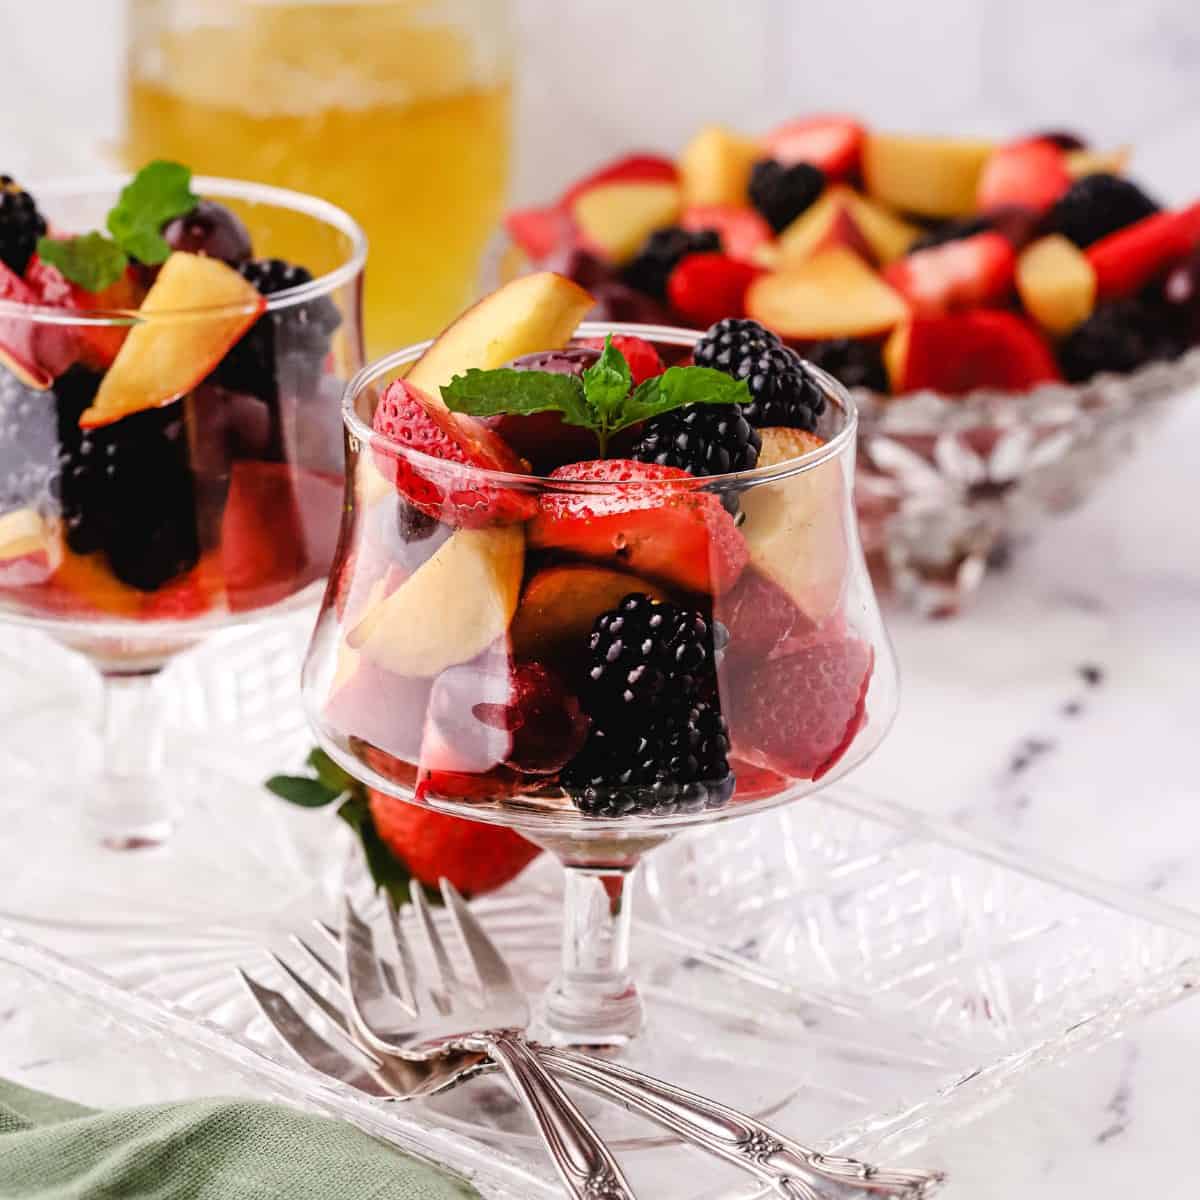 A glass dish full of a mixed fruit salad.